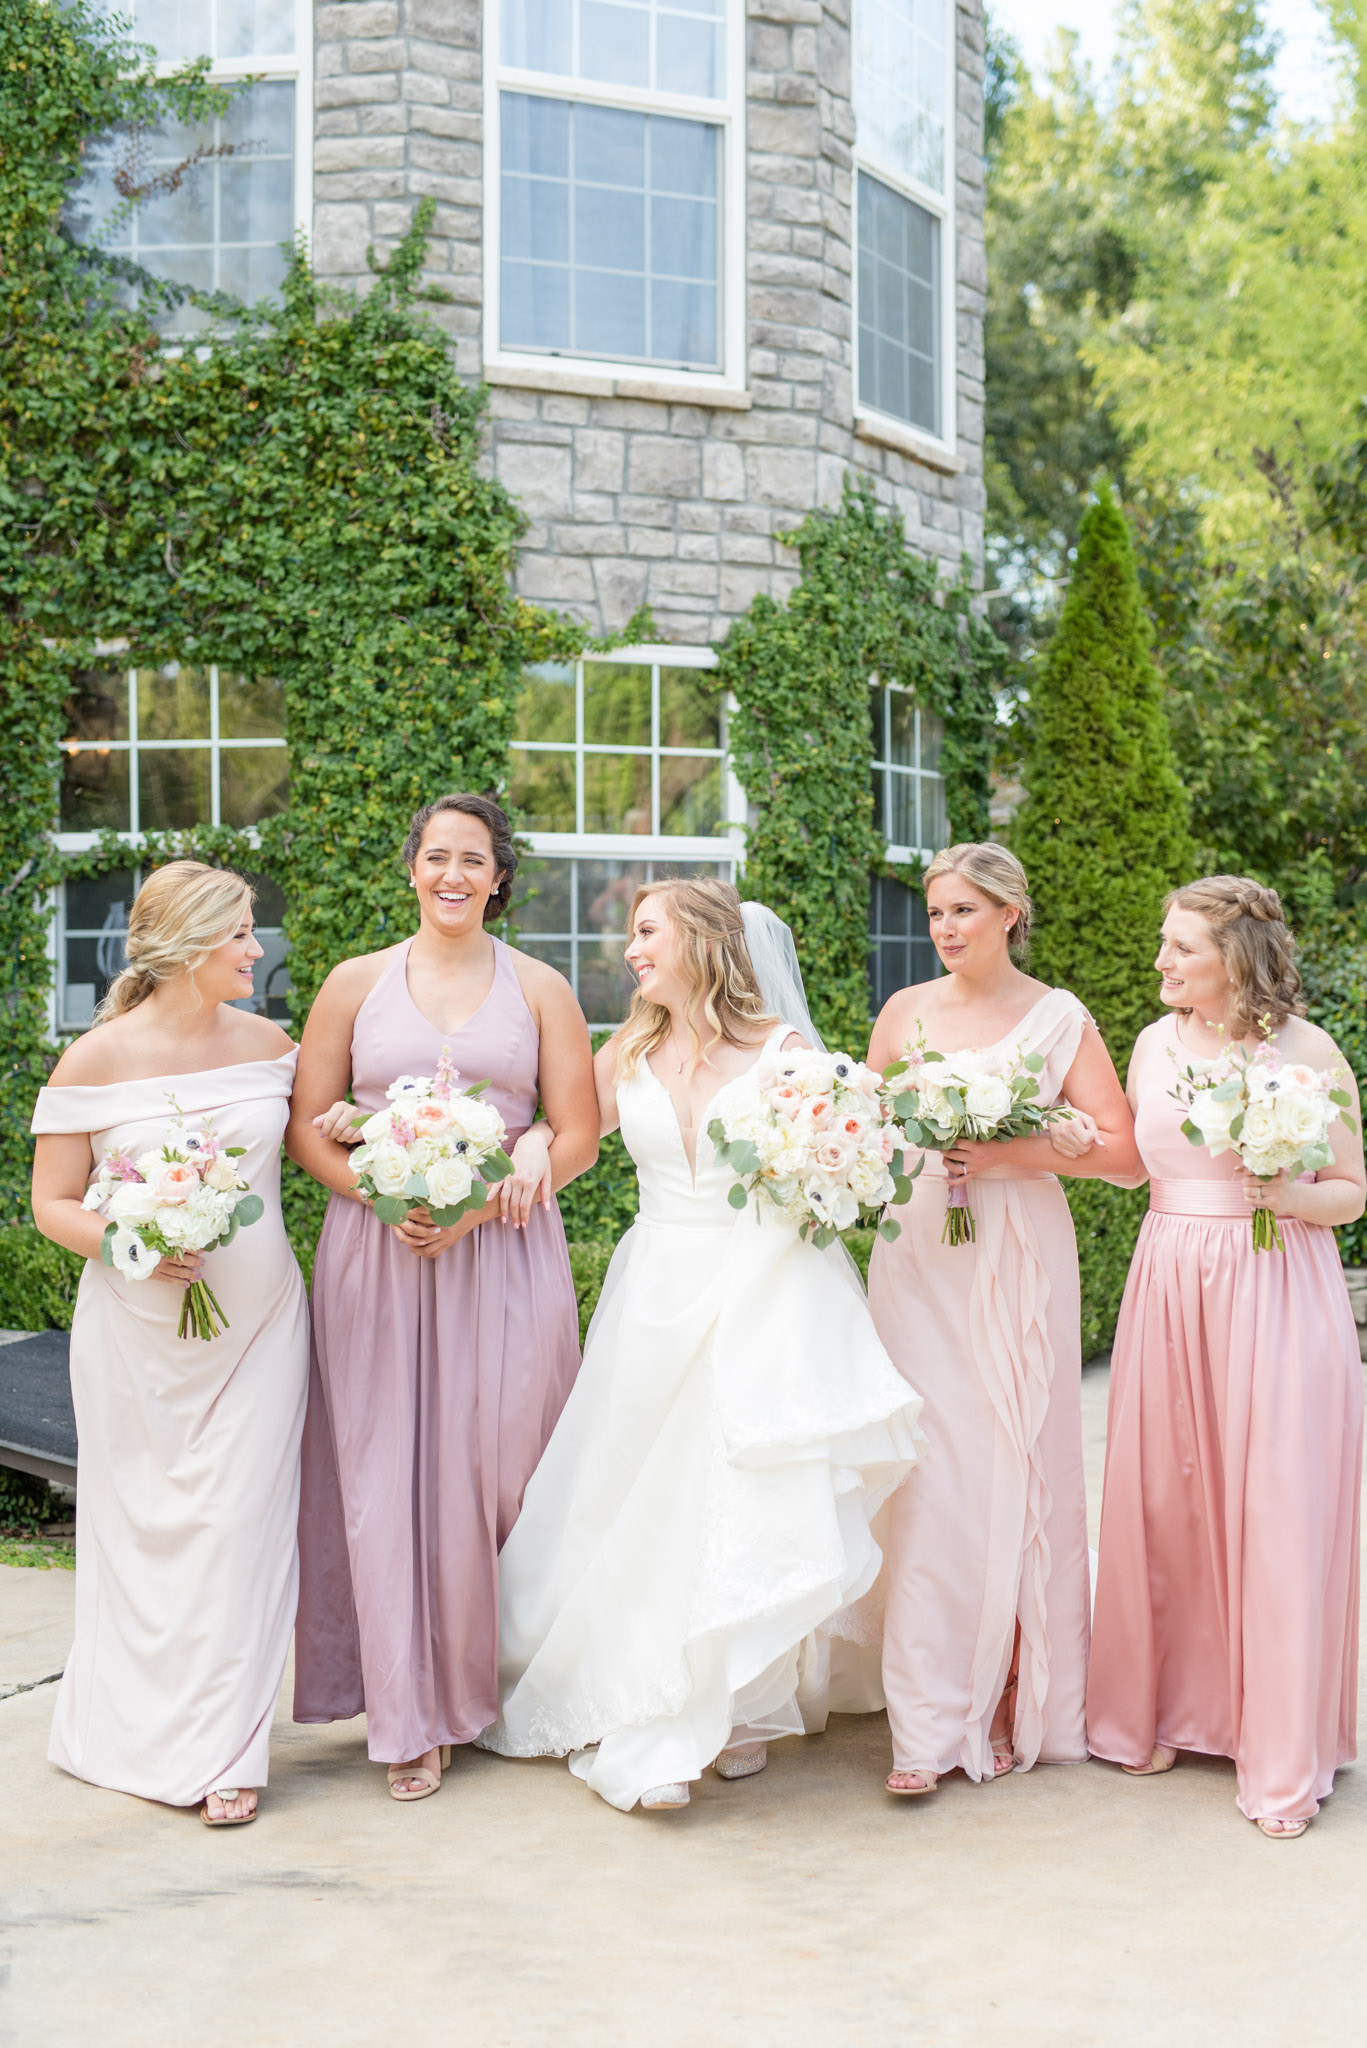 Bride and bridesmaids walk and smile together.